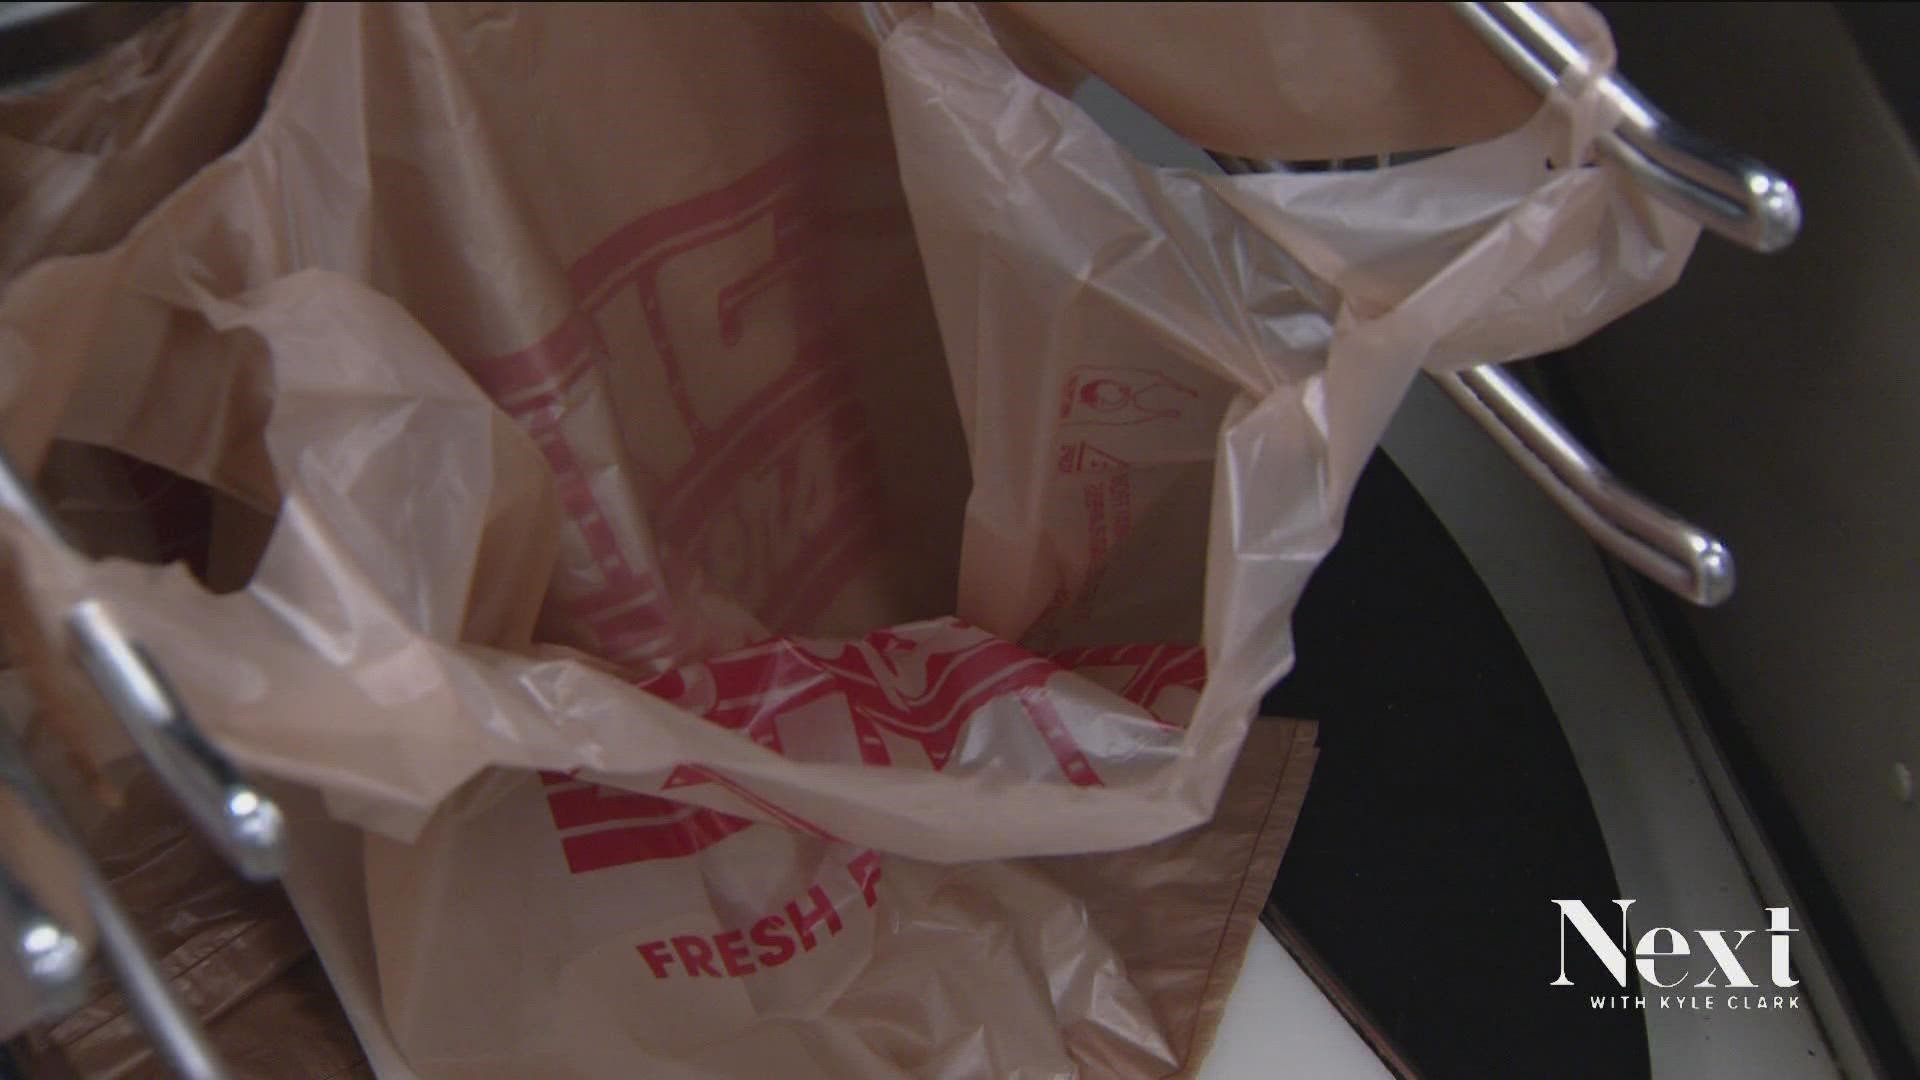 With each bag costing you an extra 10 cents at checkout, are bag fees changing habits?